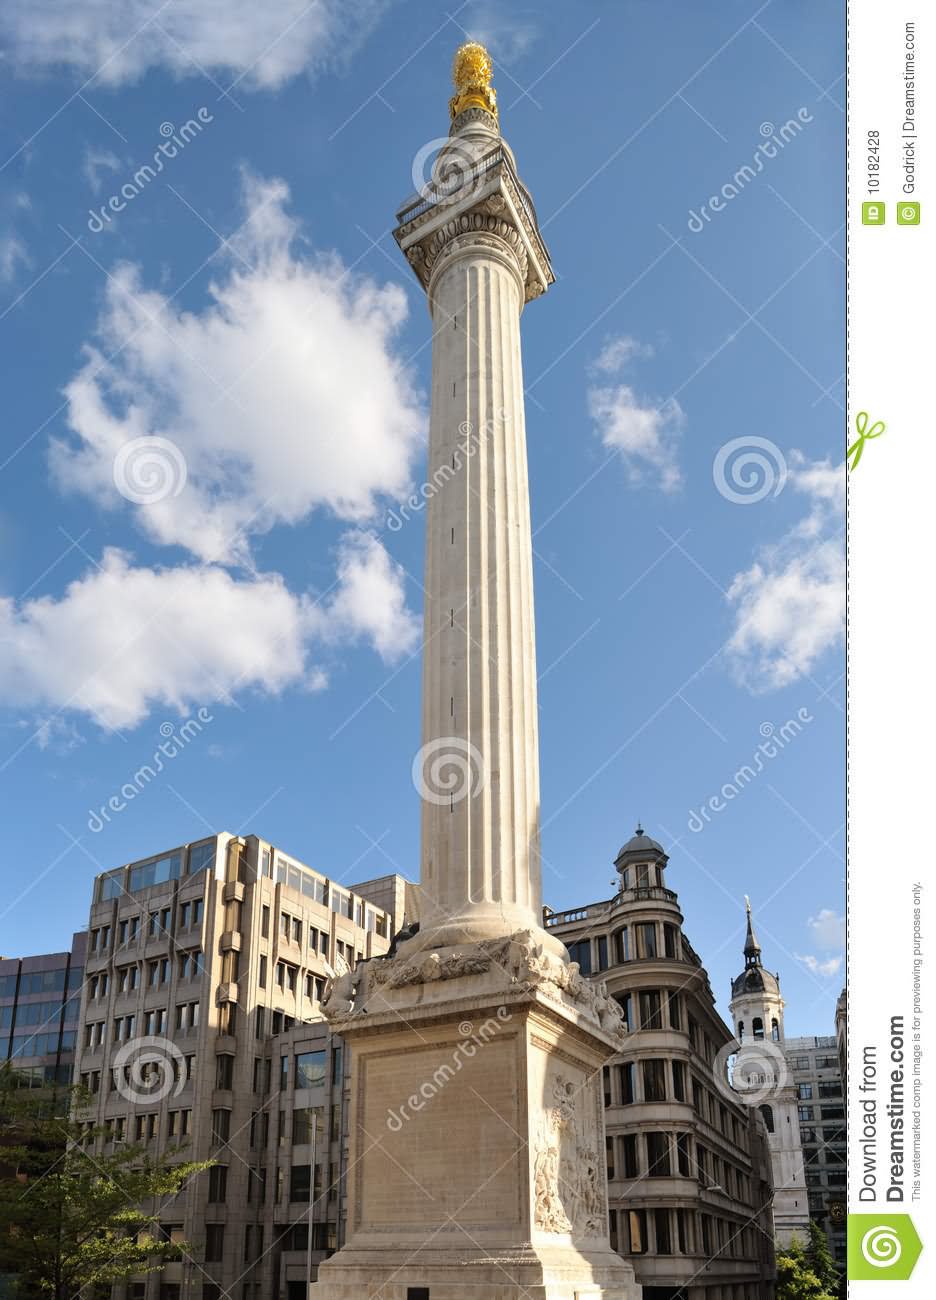 Monument To The Great Fire of London, England